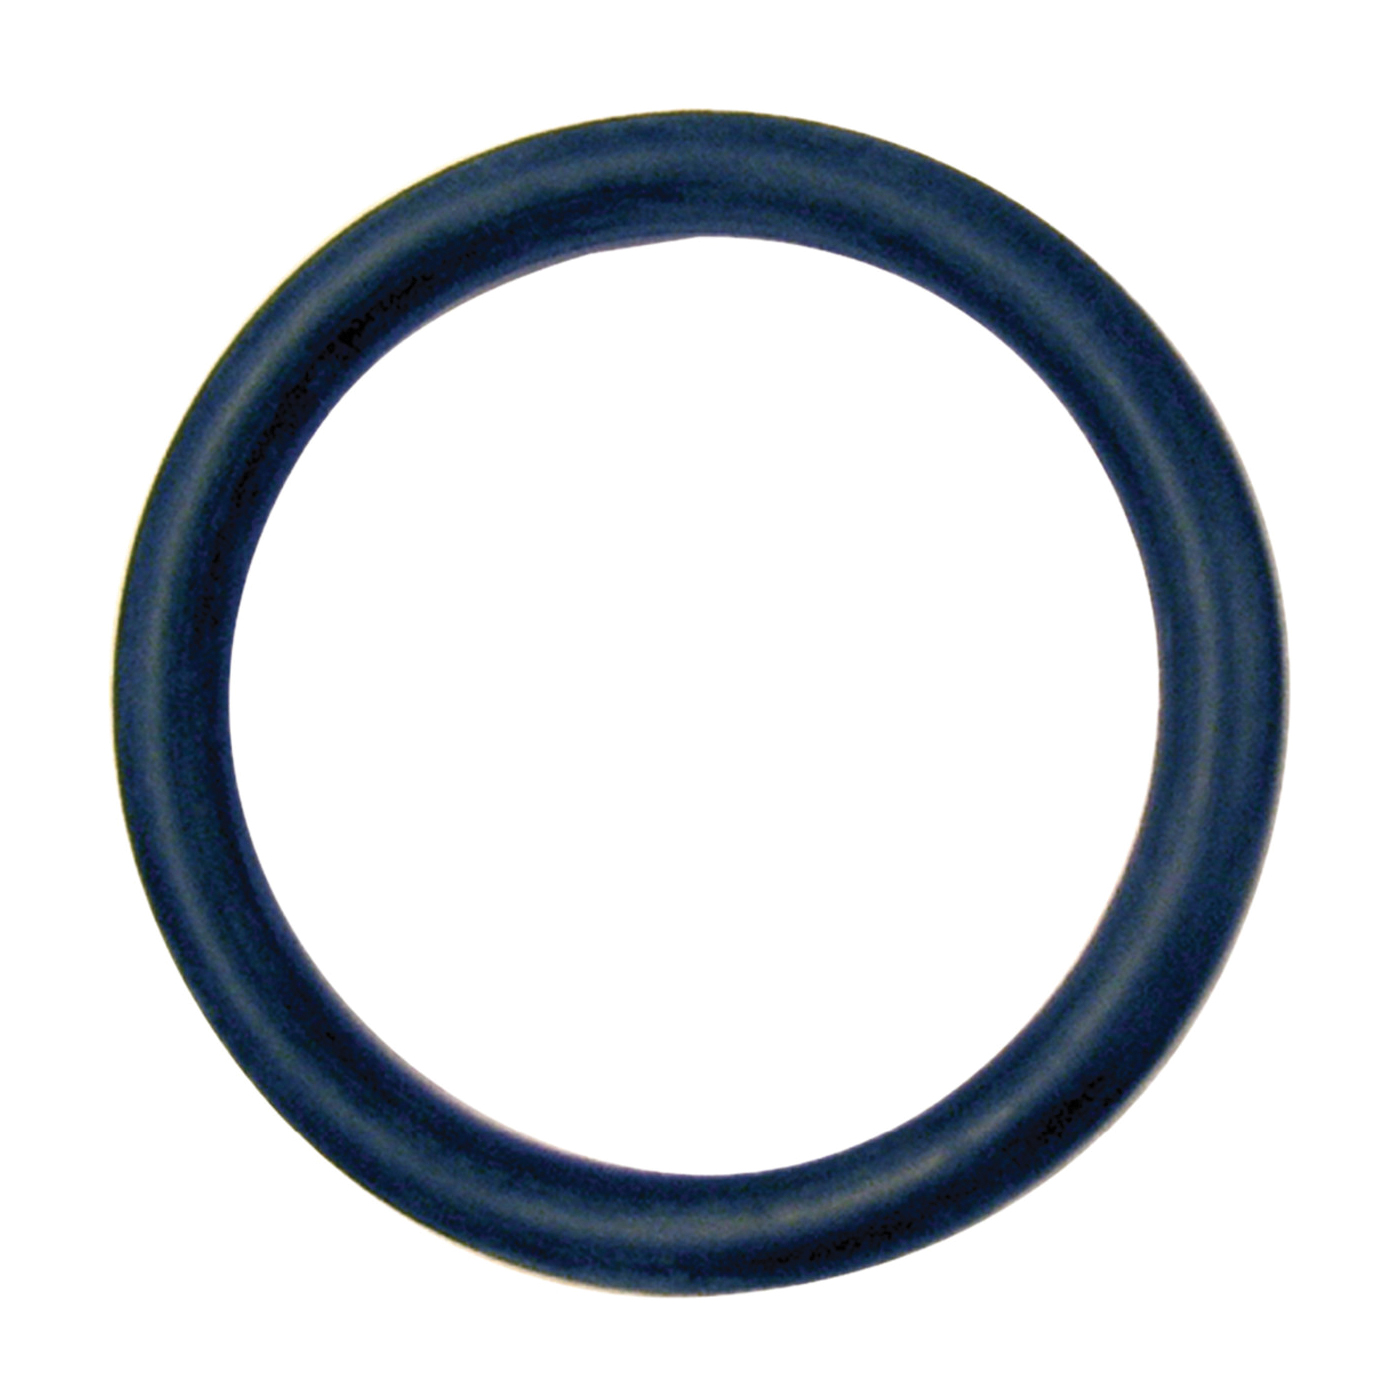 780056 Faucet O-Ring, 1-3/16 in ID x 1-5/16 in OD Dia, 1/16 in Thick